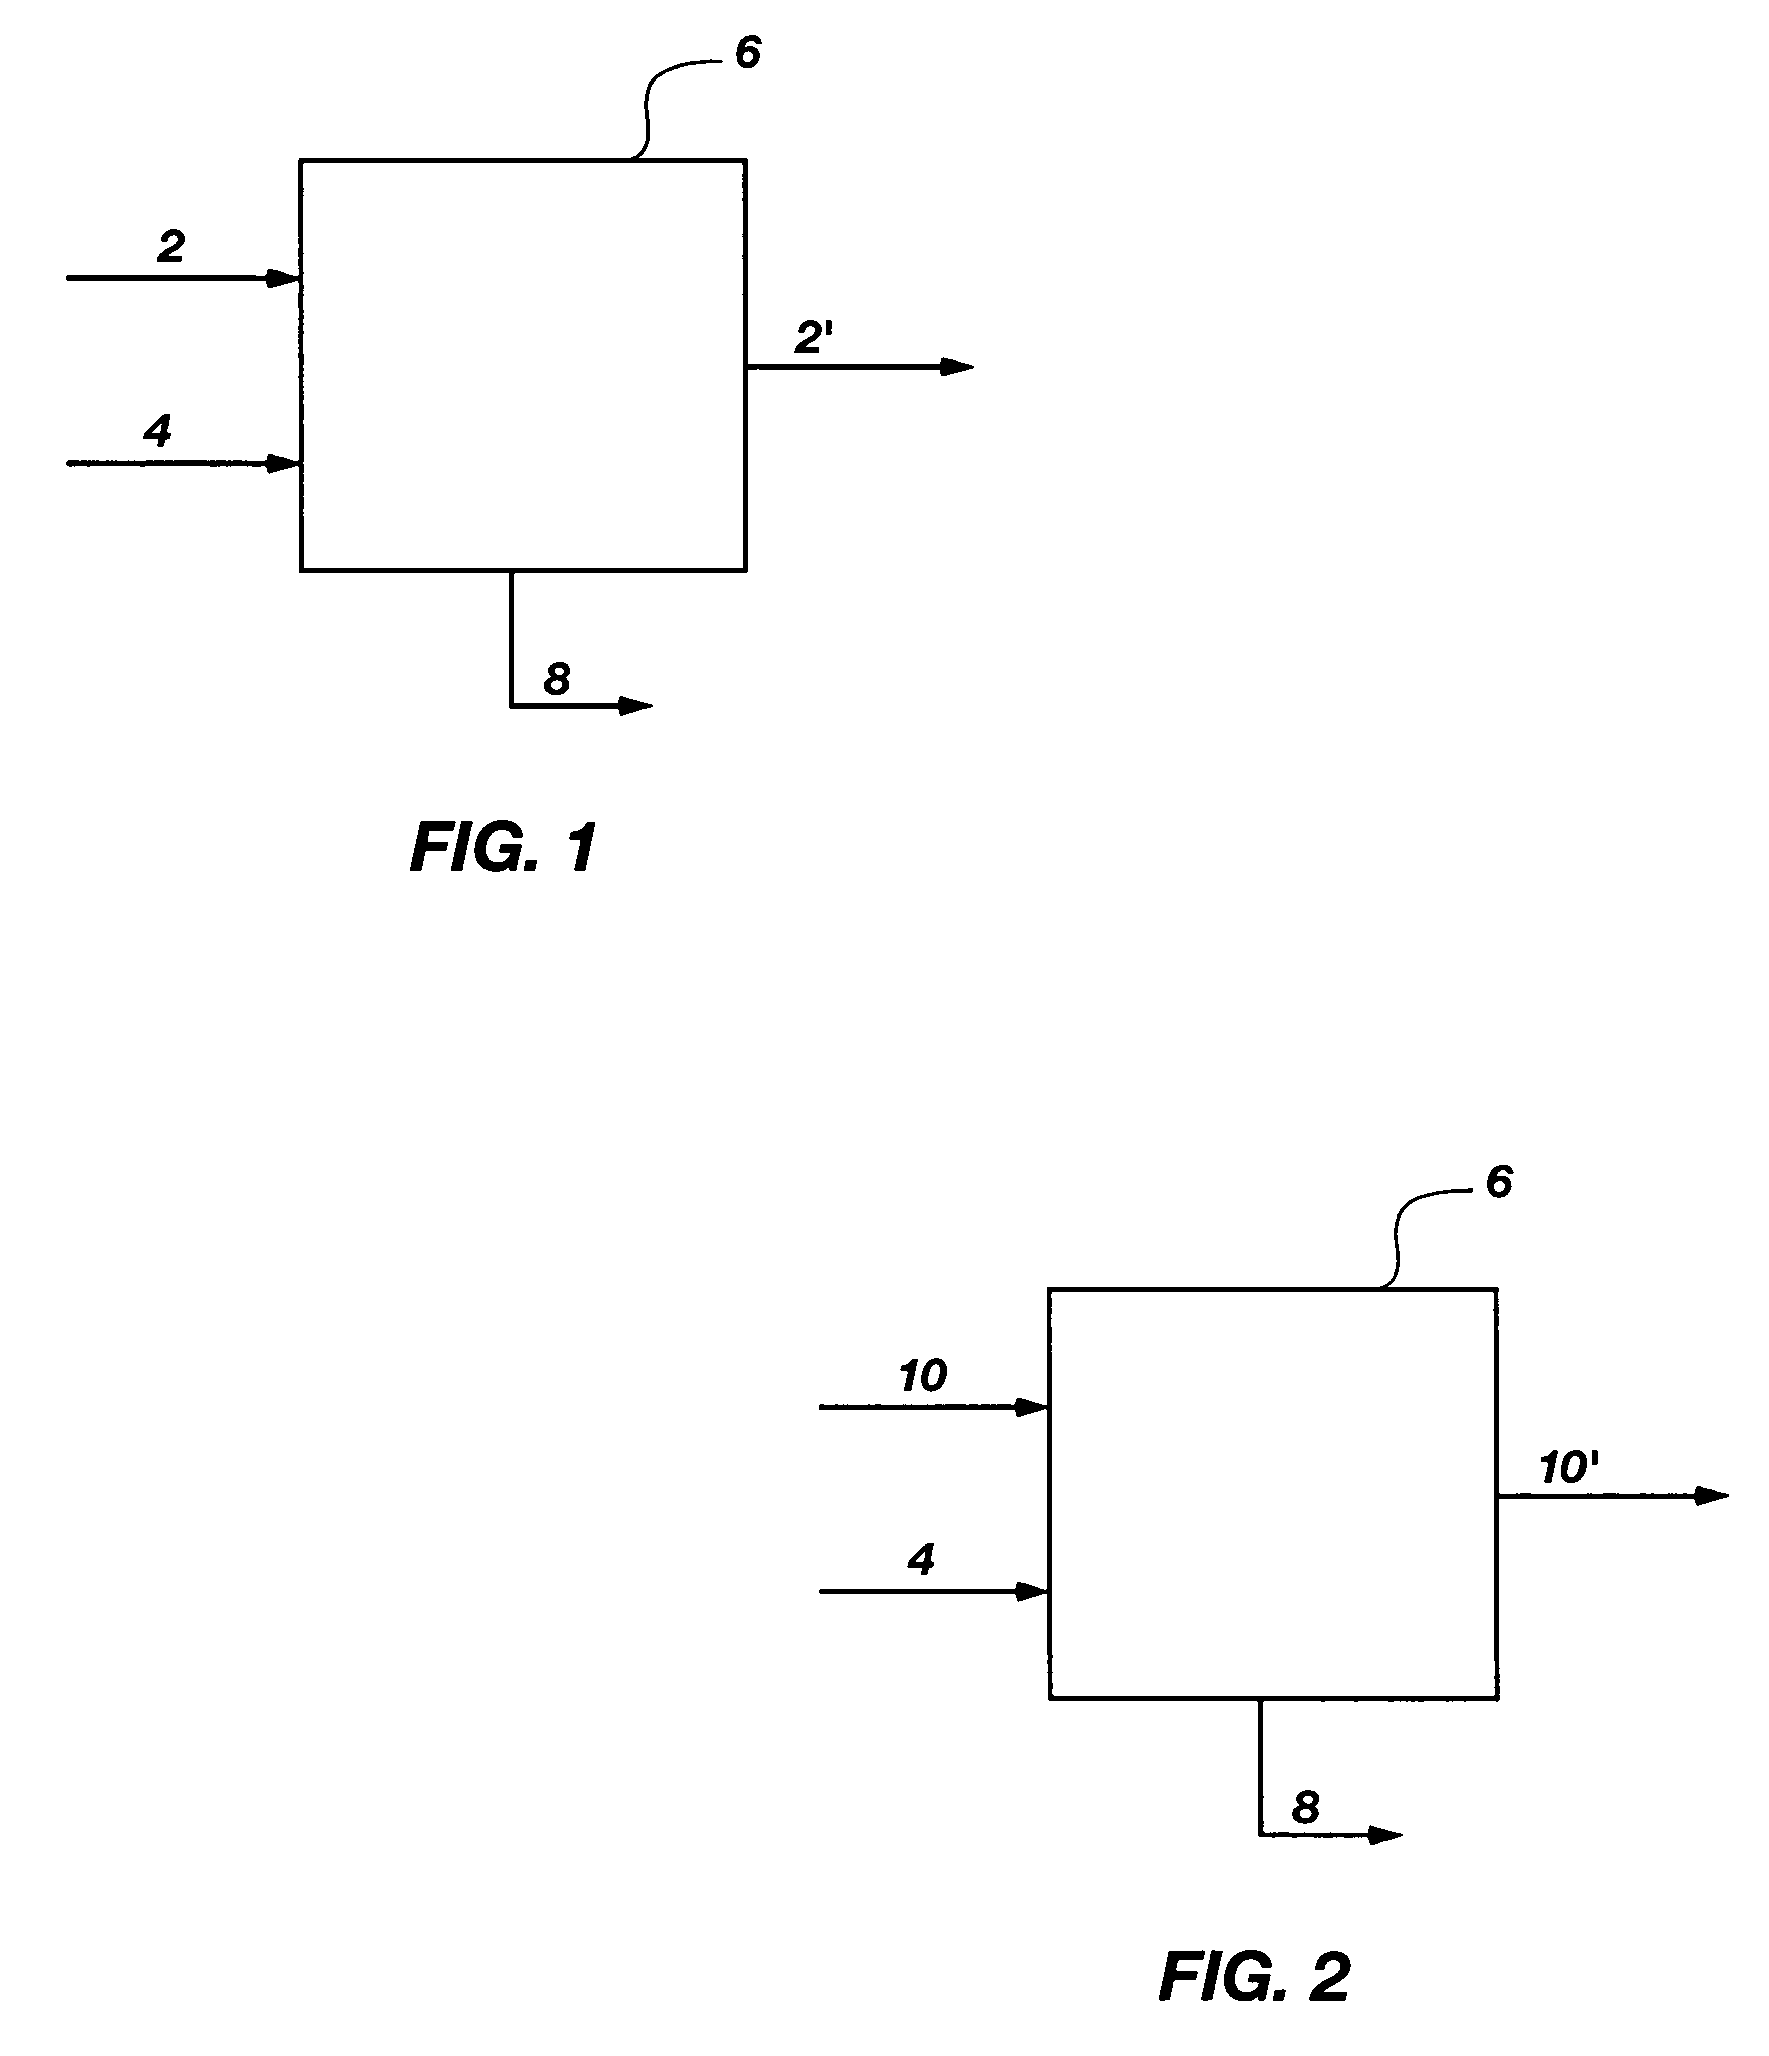 Method for removing impurities from an impurity-containing fluid stream